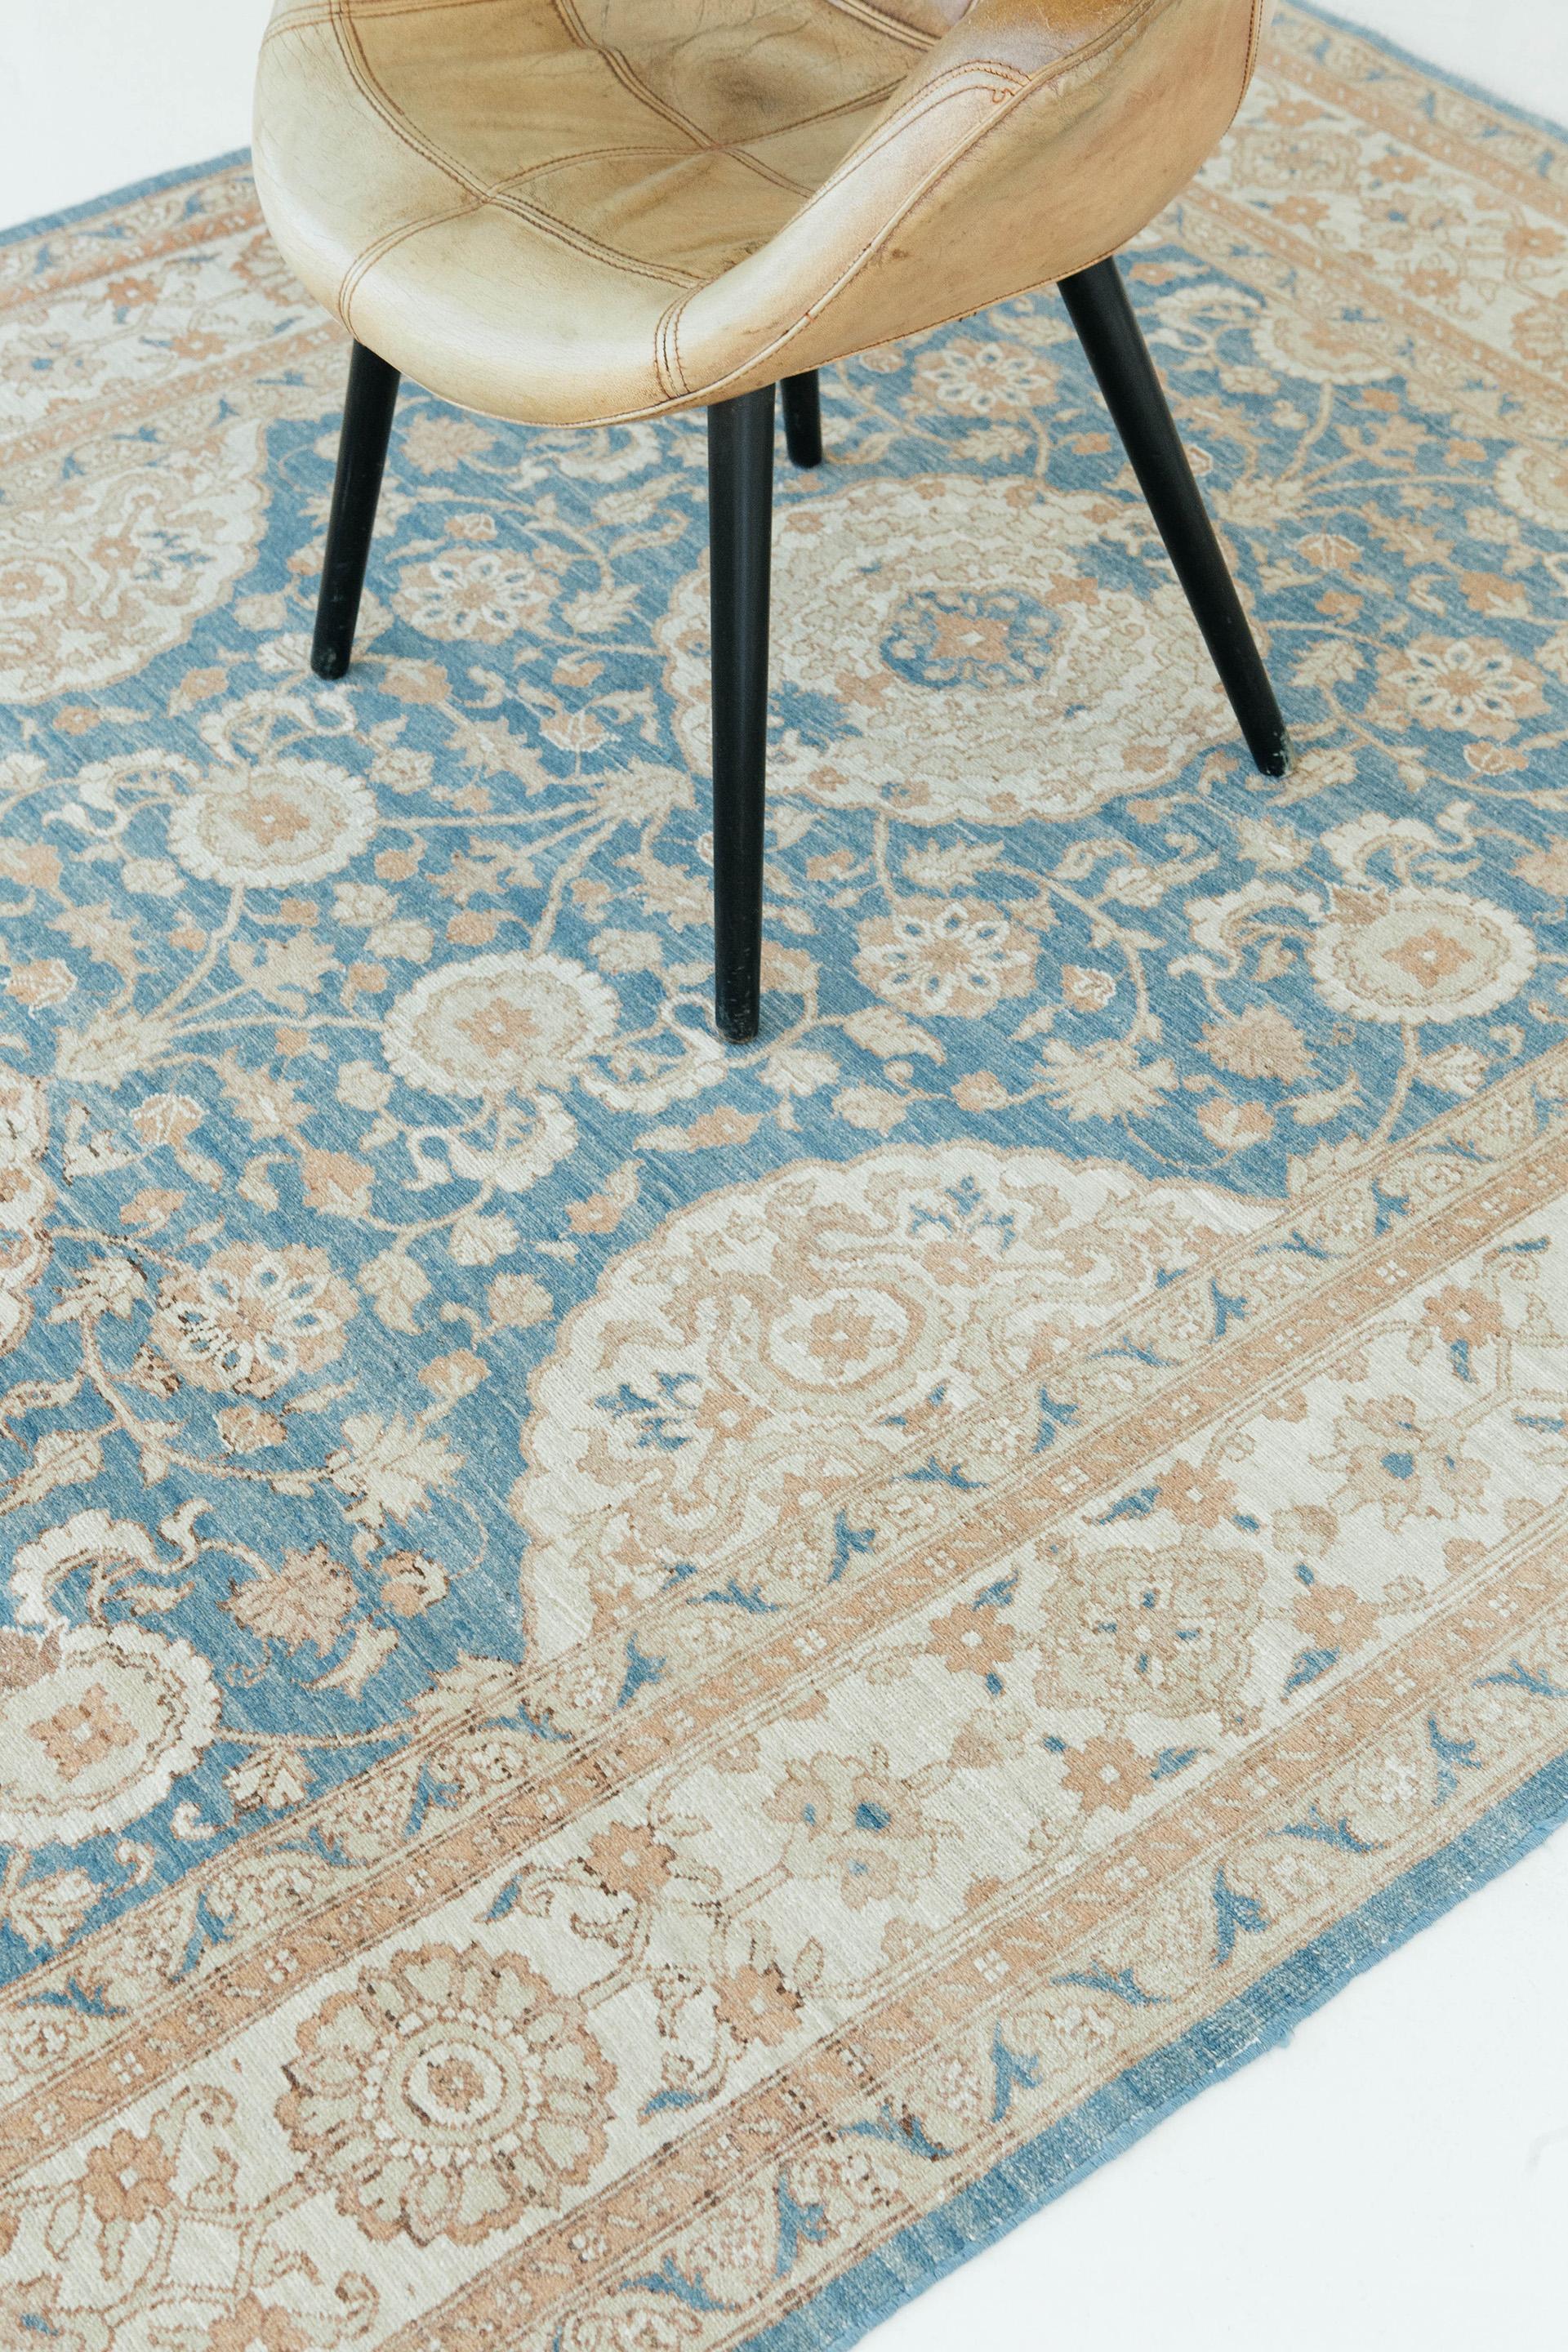 This pile woven texture rug of Amritsar, has a distinctive Indian design with a precise colonial influence. While the rug displays natural colors, a cool translucent shade of blue complemented by a border of brown hues, creating a dramatic effect